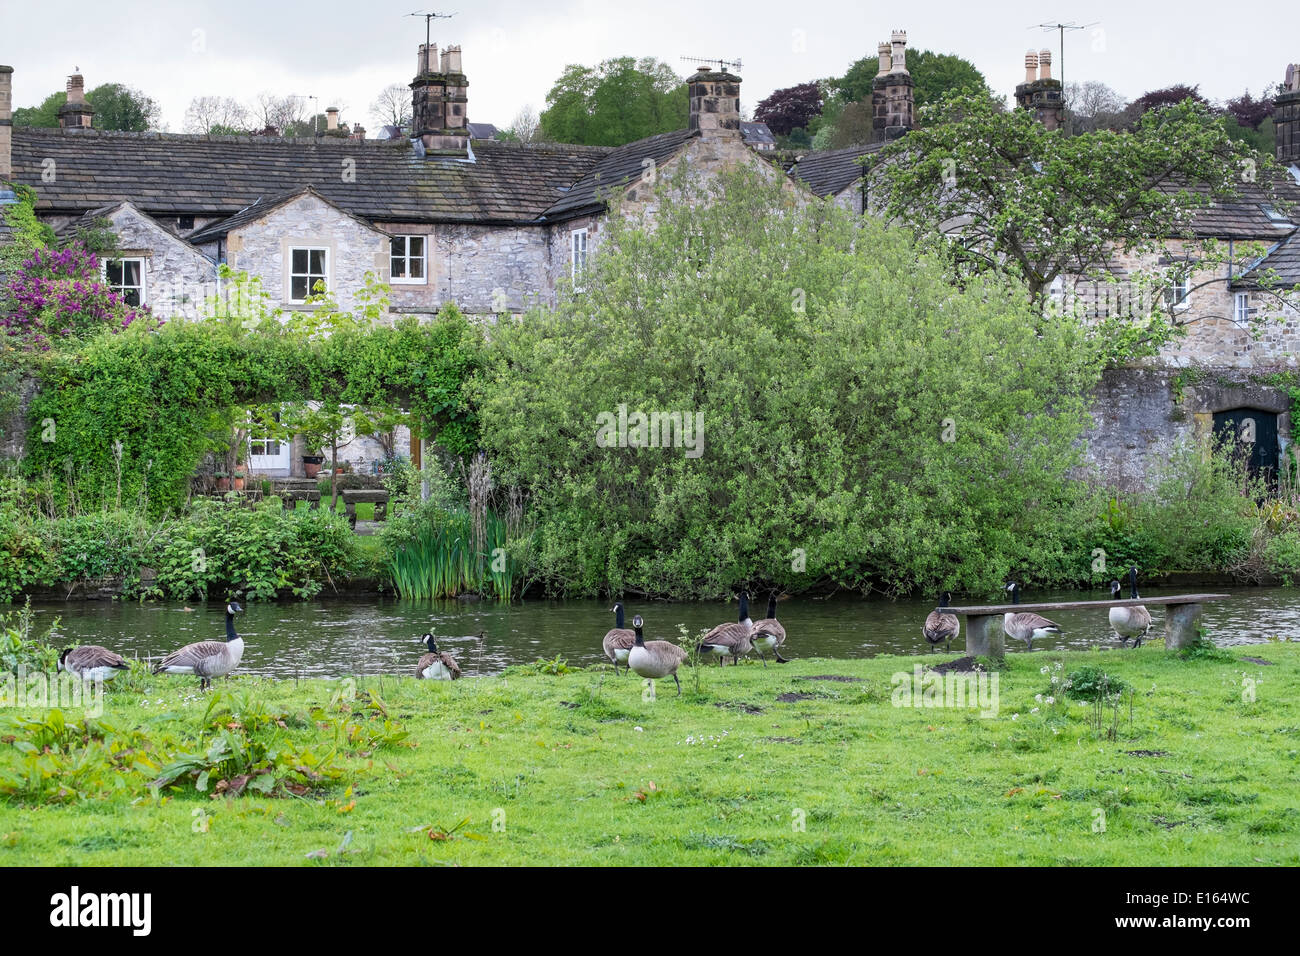 Canada gees, Branta canadensis, beside the river Wye, Bakewell, Peak District National Park, Derbyshire, England, May Stock Photo